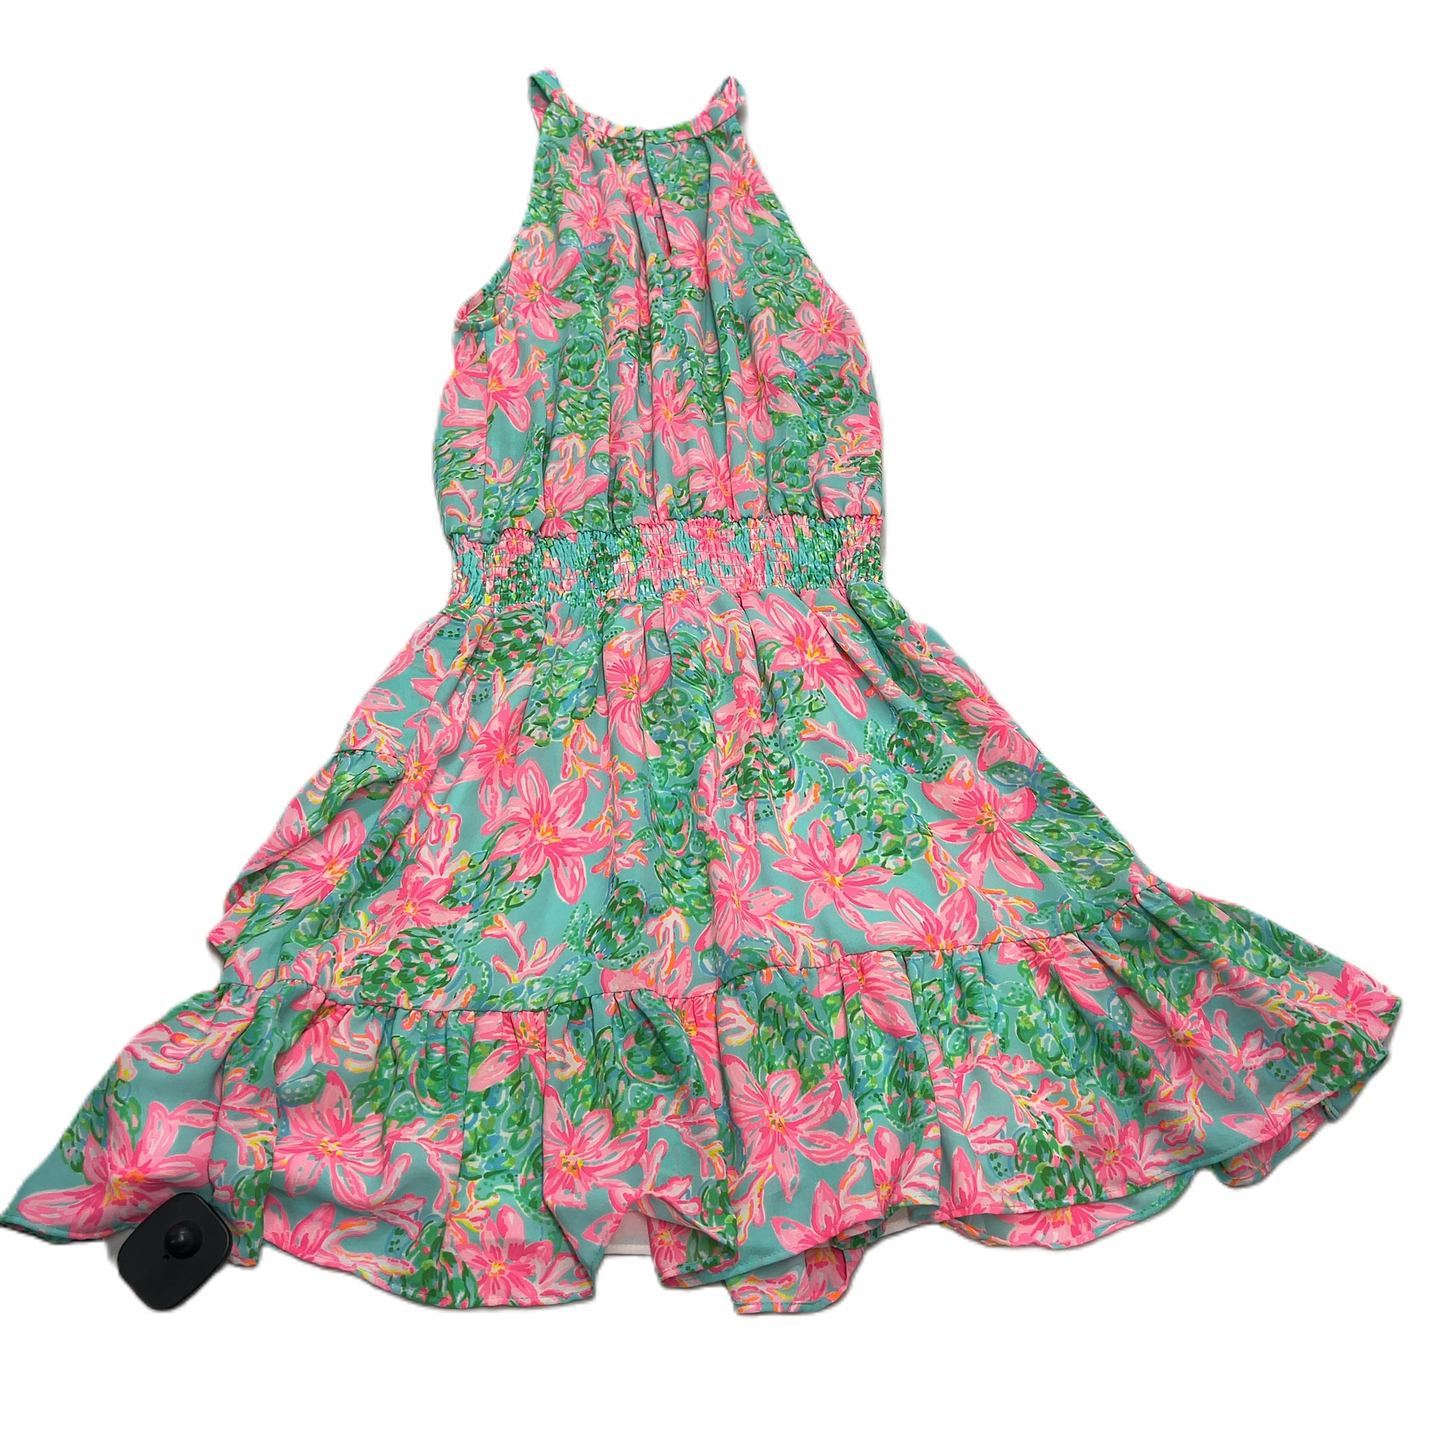 Green & Pink  Dress Designer By Lilly Pulitzer  Size: S